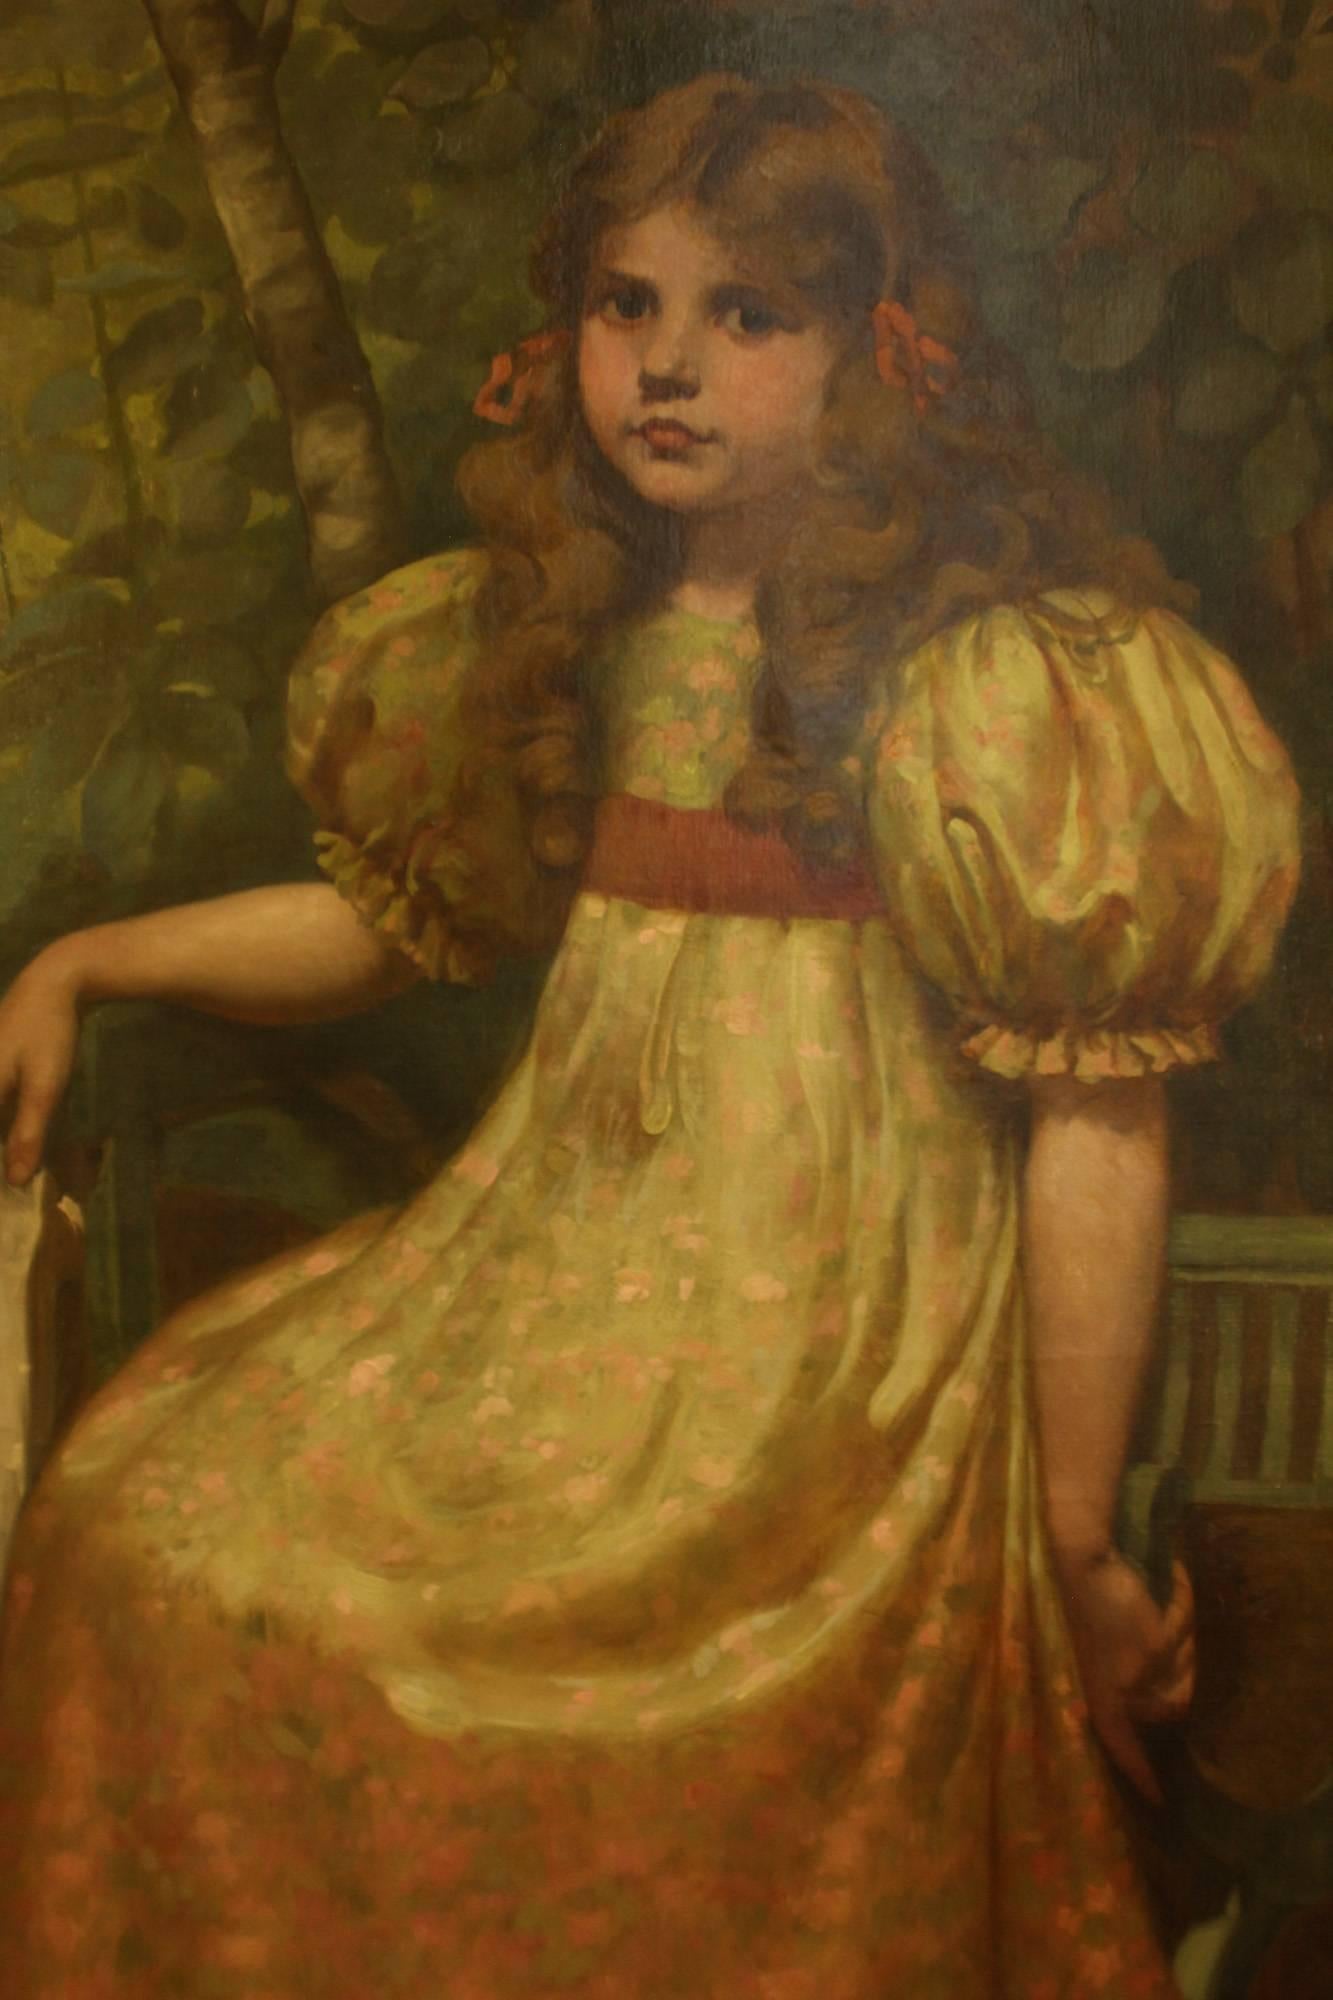 "Portrait of a Girl" oil painting by Richard George Hinchliffe.

All of the items that we advertise for sale have been as accurately described as possible and are in excellent condition, unless otherwise stated. Please note that we are